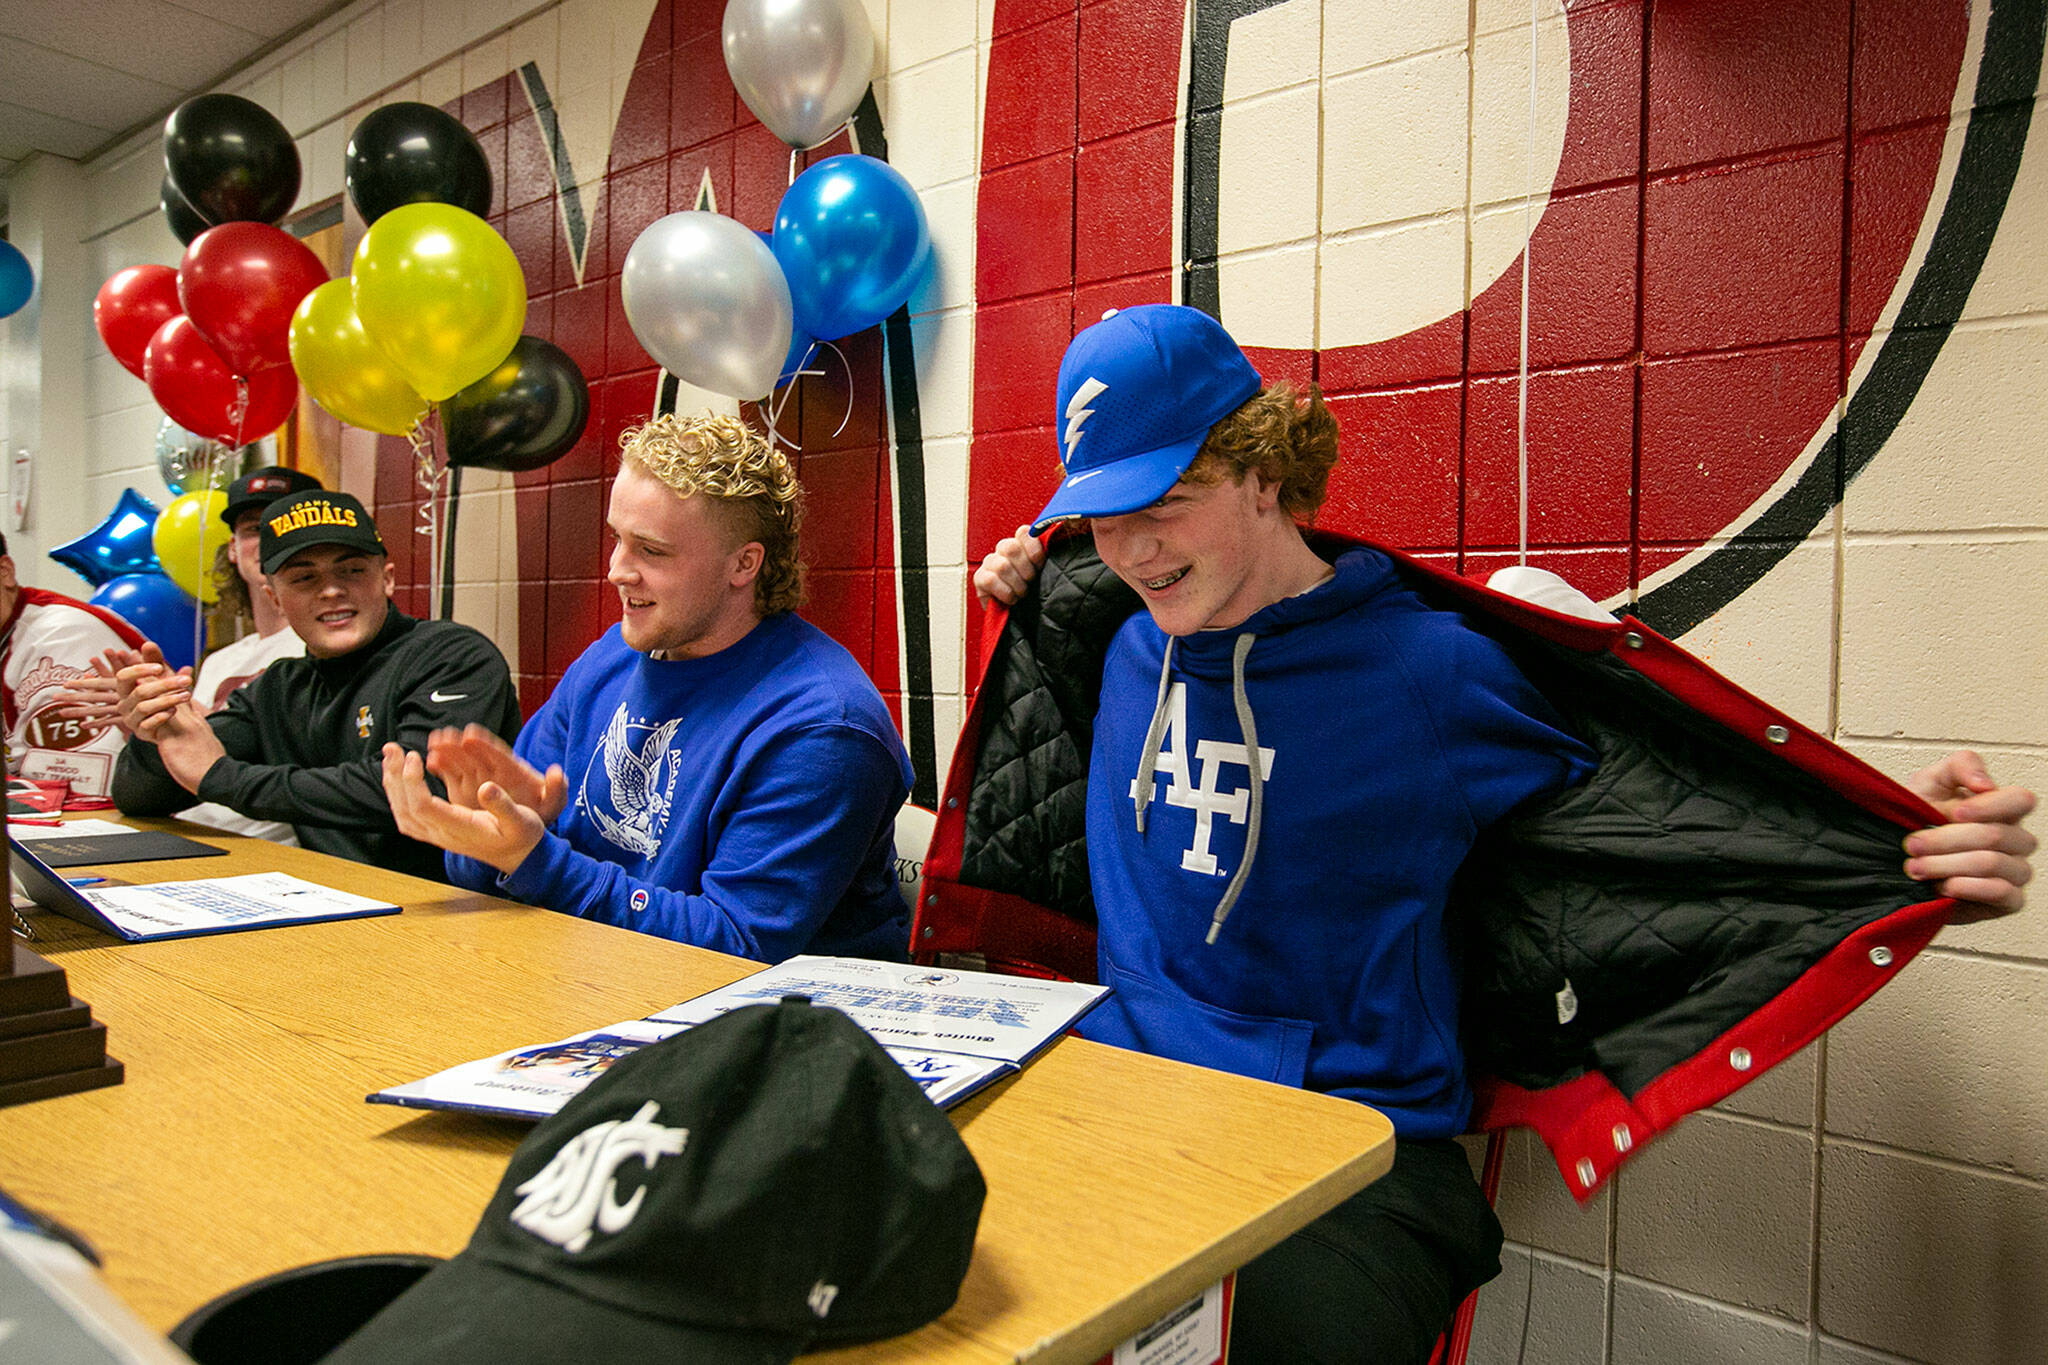 Dylan Carson announces his commitment to Air Force during National Signing Day on Feb. 2, 2022, at Marysville Pilchuck High School in Marysville. (Ryan Berry / The Herald)